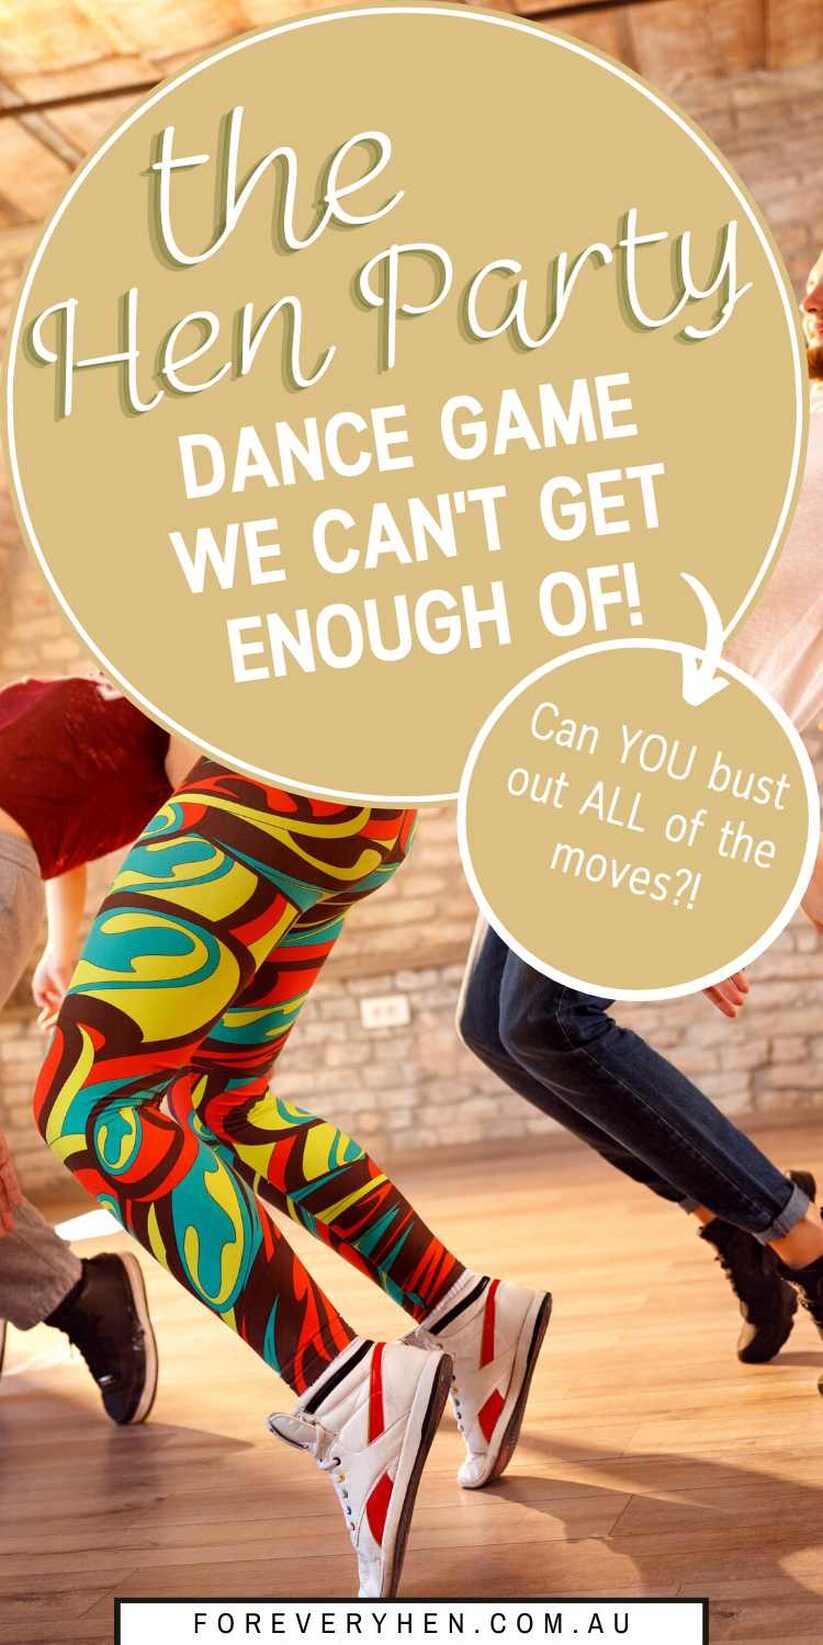 Image of three women dancing on their toes. Text overlay: The Hen Party Dance game we can't get enough of! Can YOU bust out ALL of the moves?!